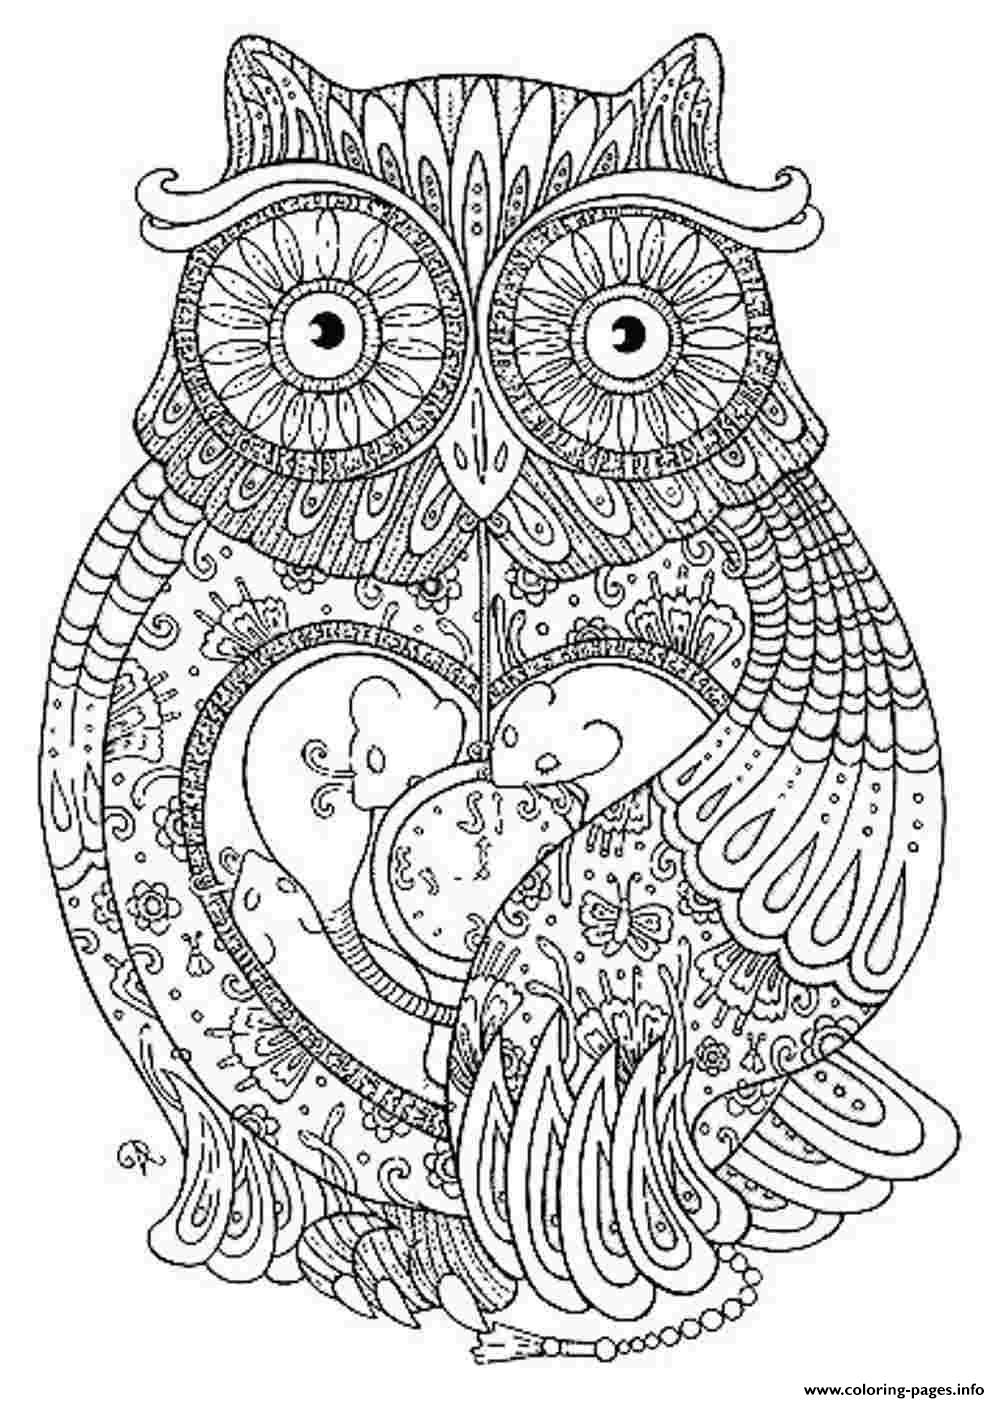 Animals Coloring Pages For Adults
 Animal Coloring Pages For Adults Coloring Pages Printable